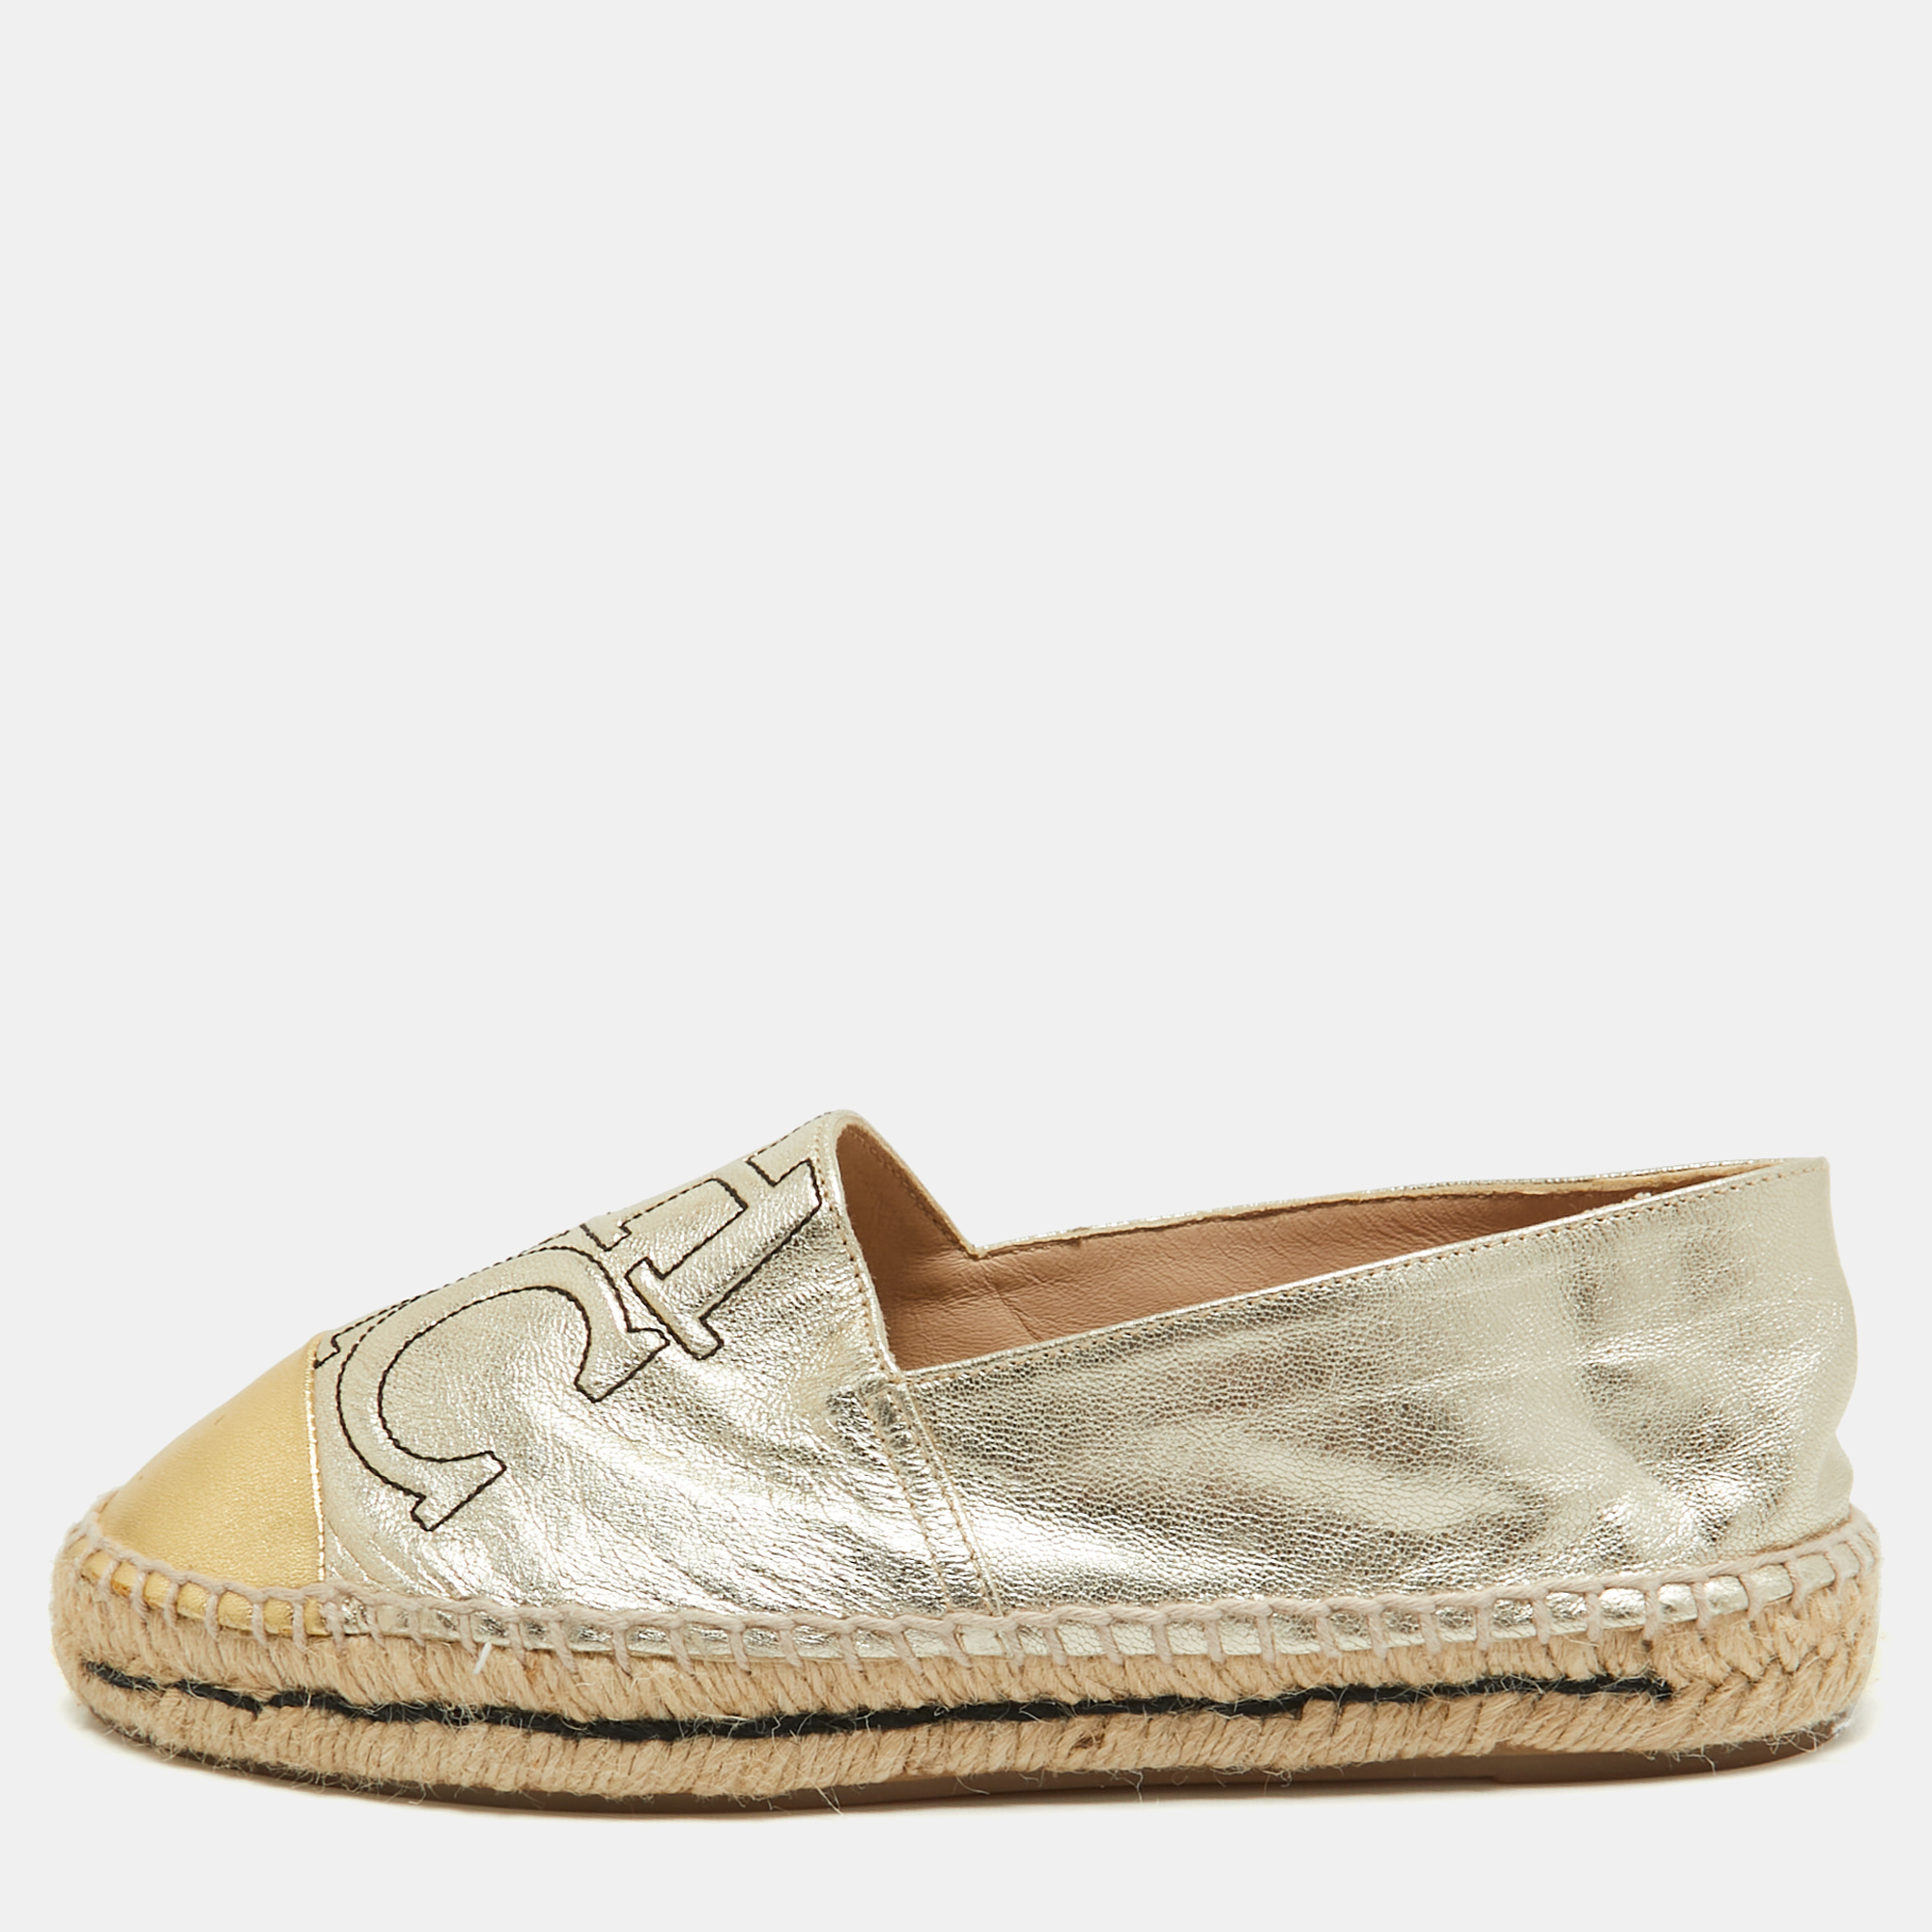 Pre-owned Ch Carolina Herrera Gold Leather Espadrille Flats Size 38